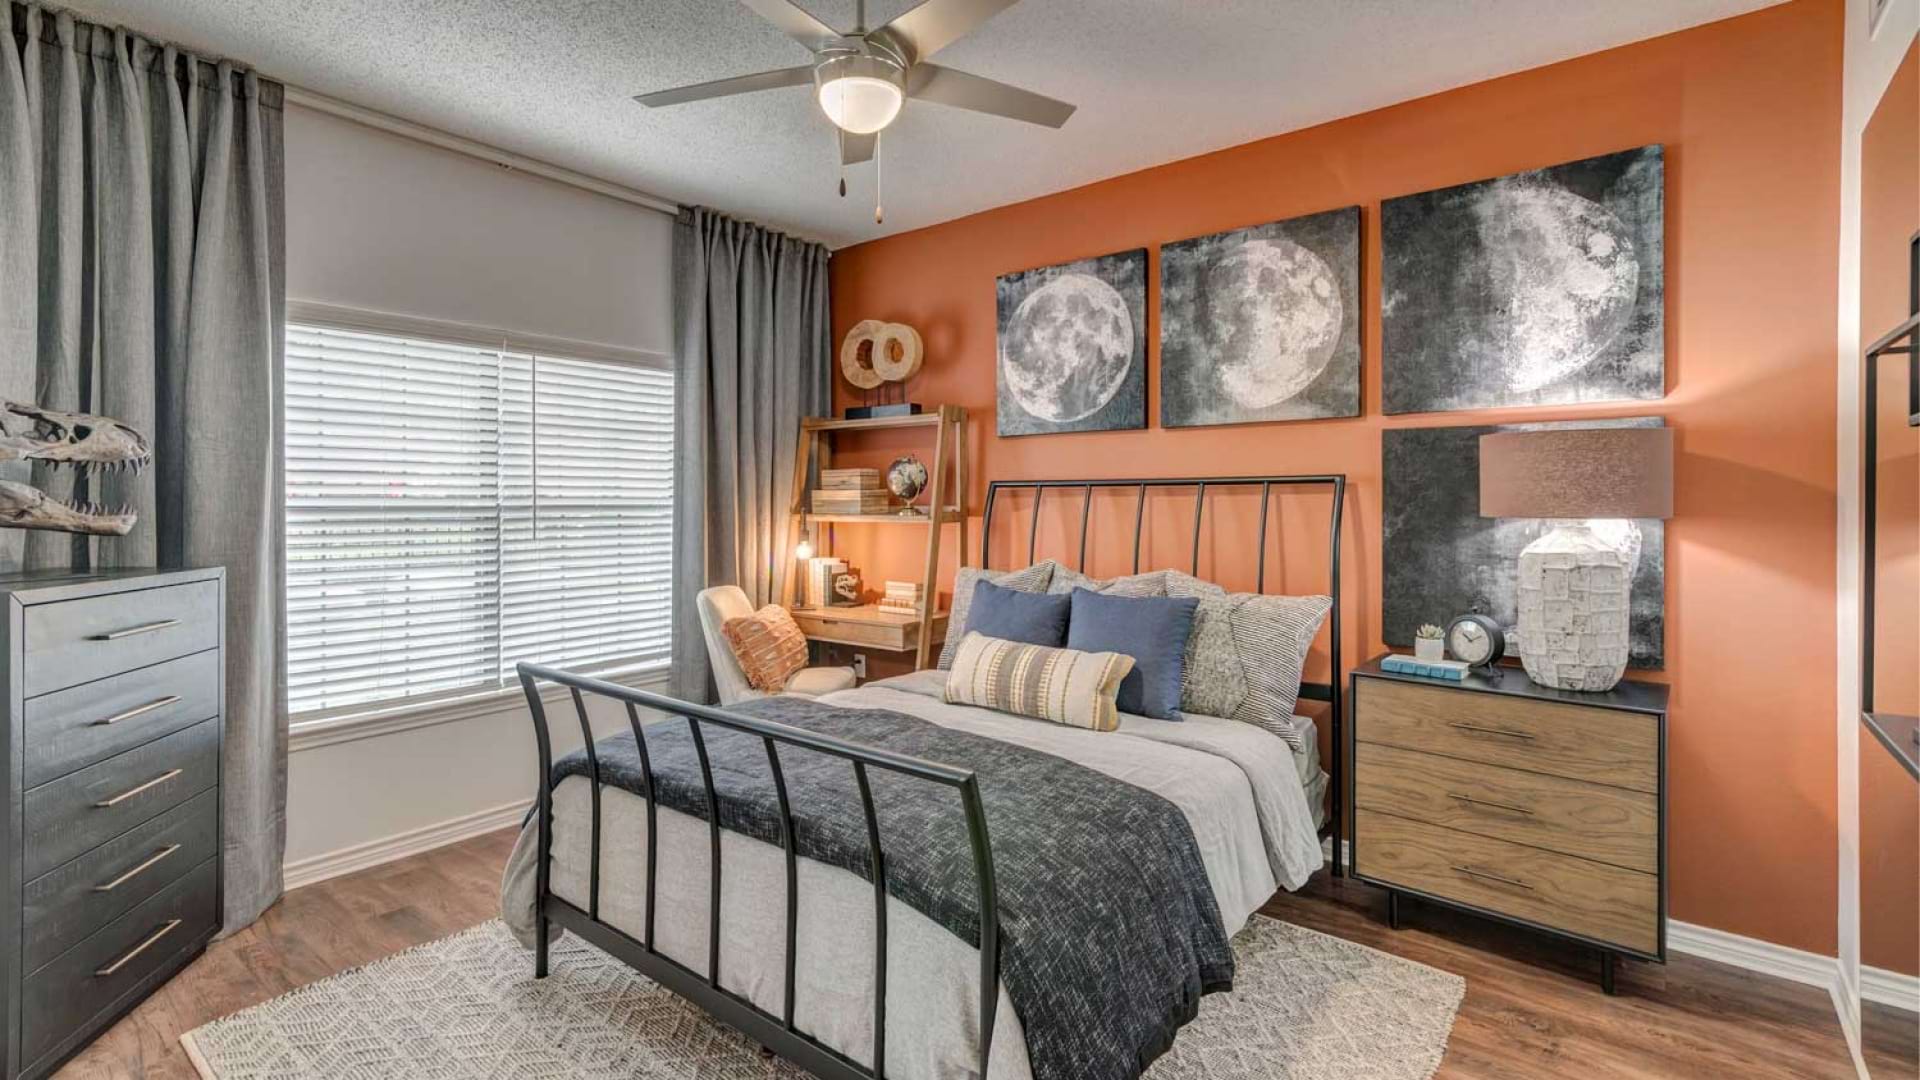 Modern apartment bedroom with wide windows and wood-style flooring at our apartments for rent in Irving, TX